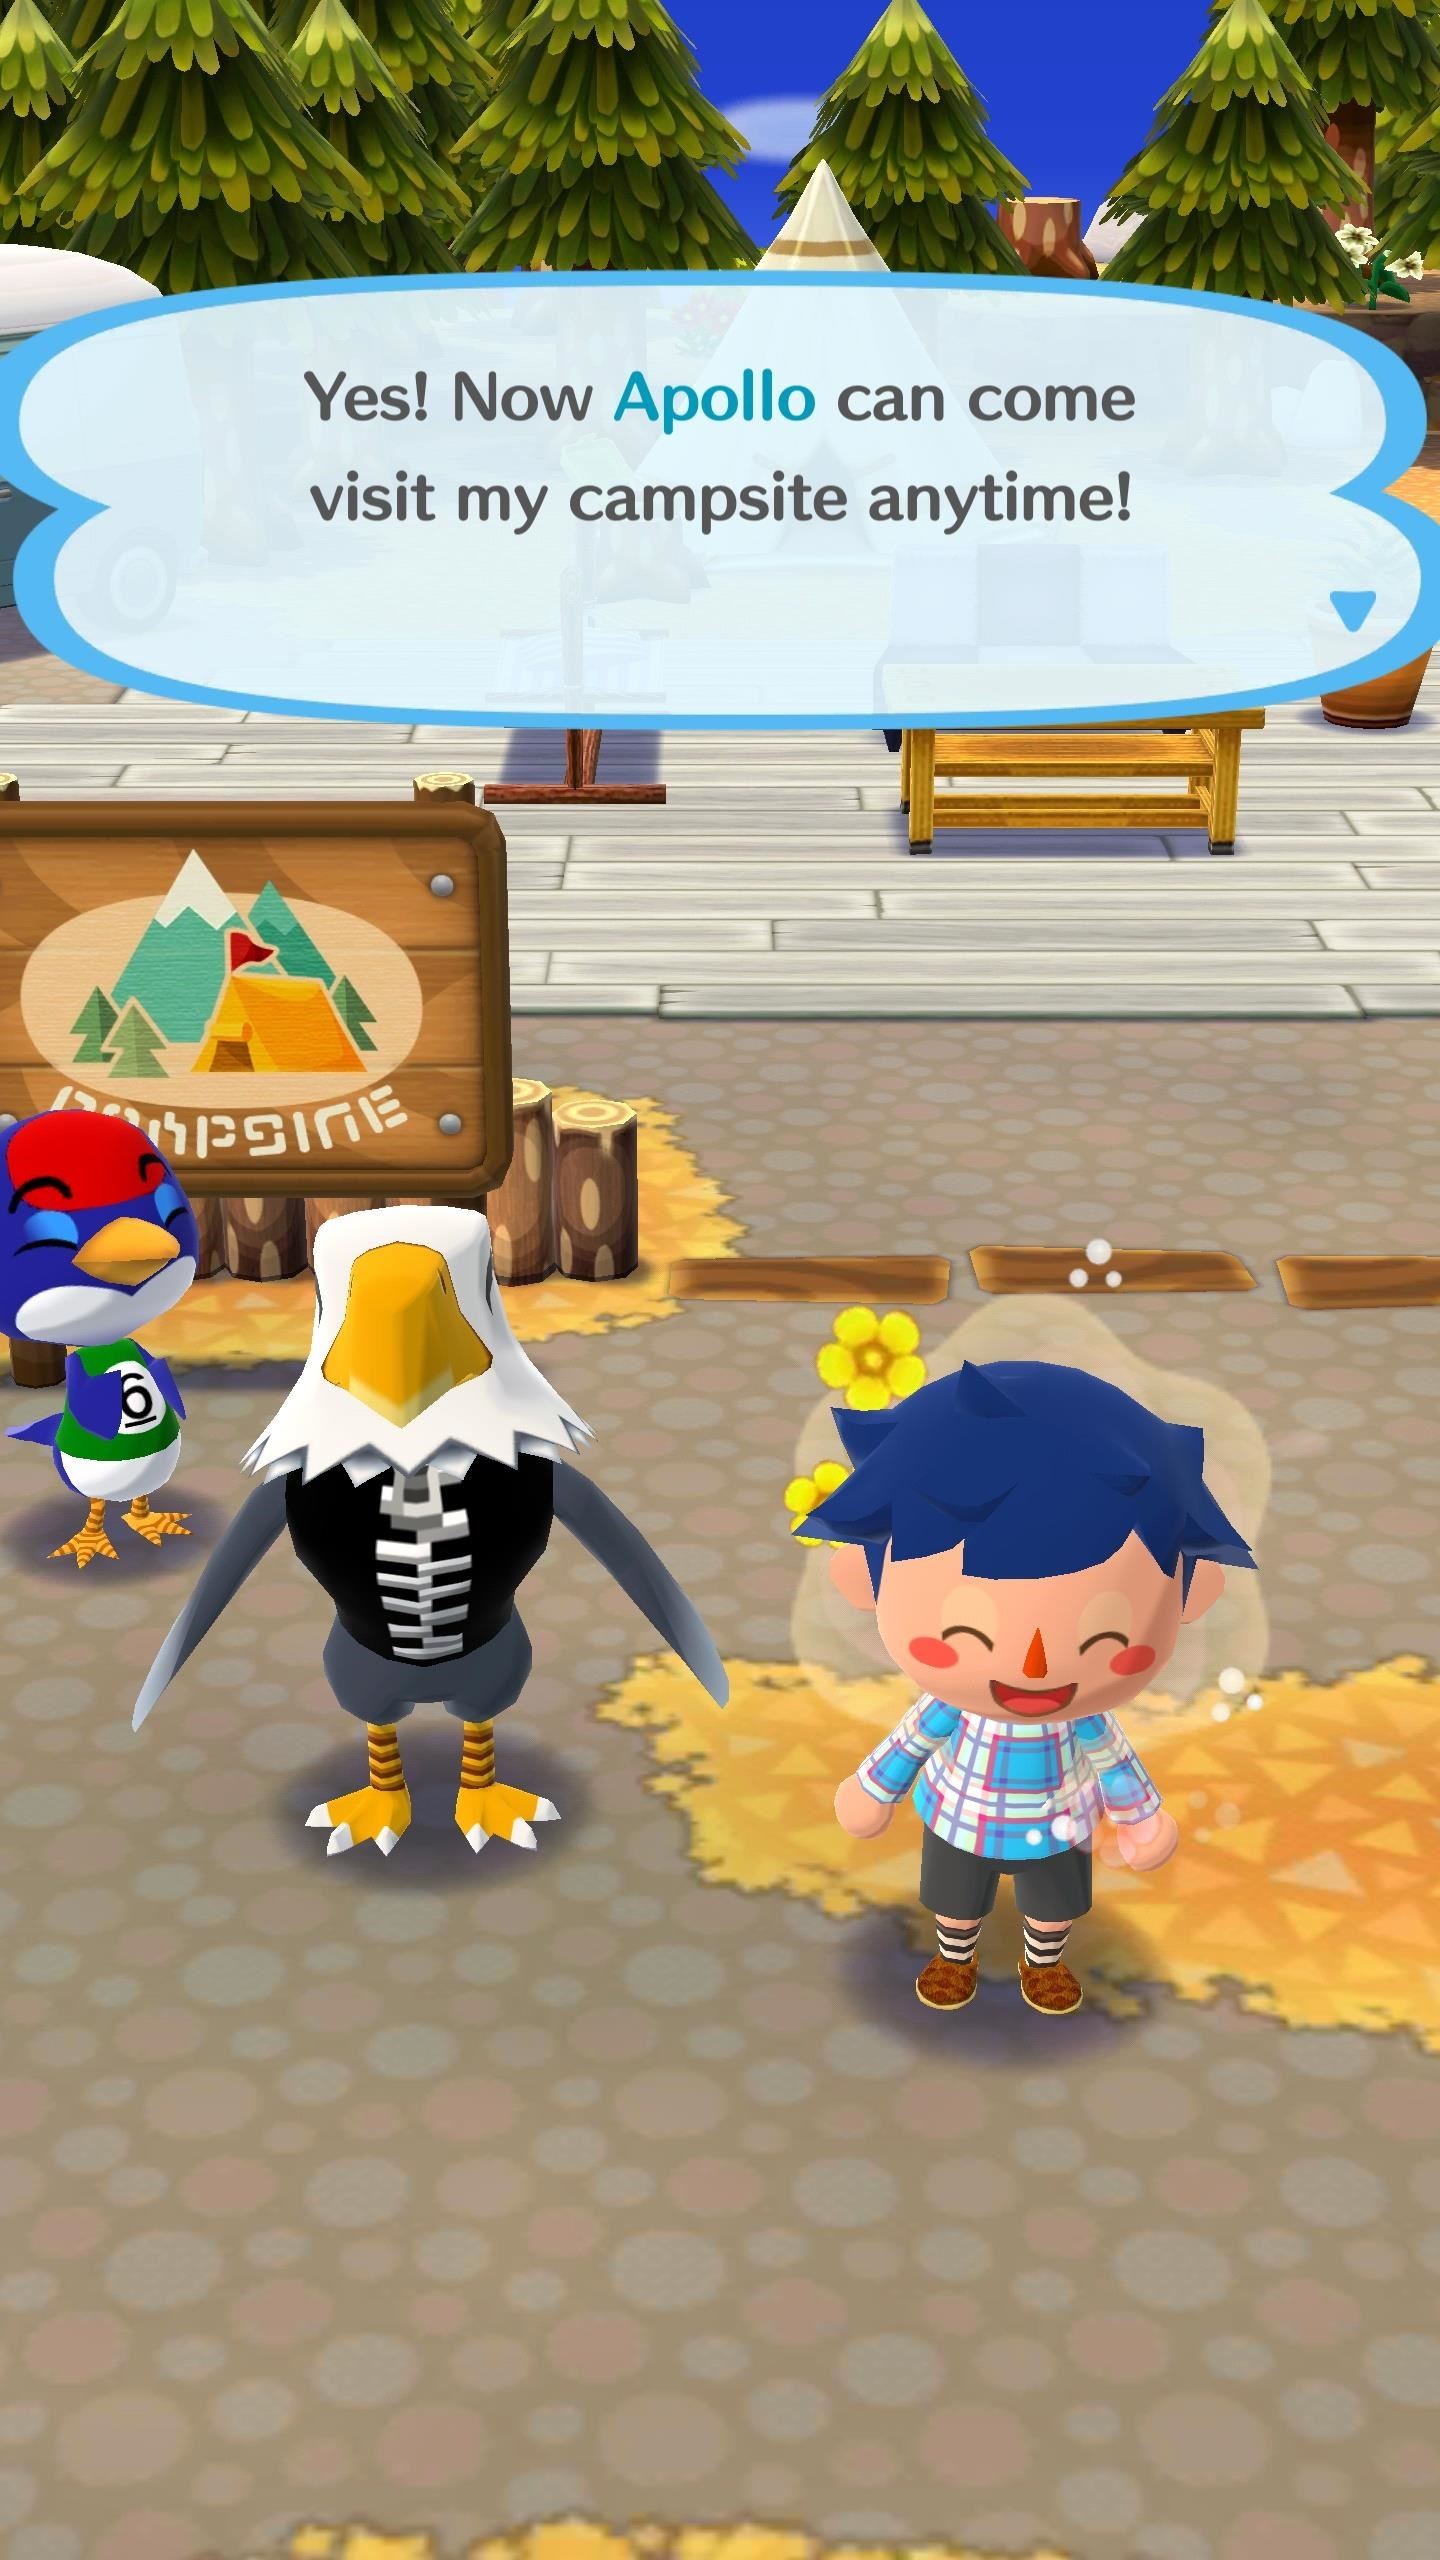 Pocket Camp 101: How to Get Your Animal Friends to Come to Your Campsite in Animal Crossing